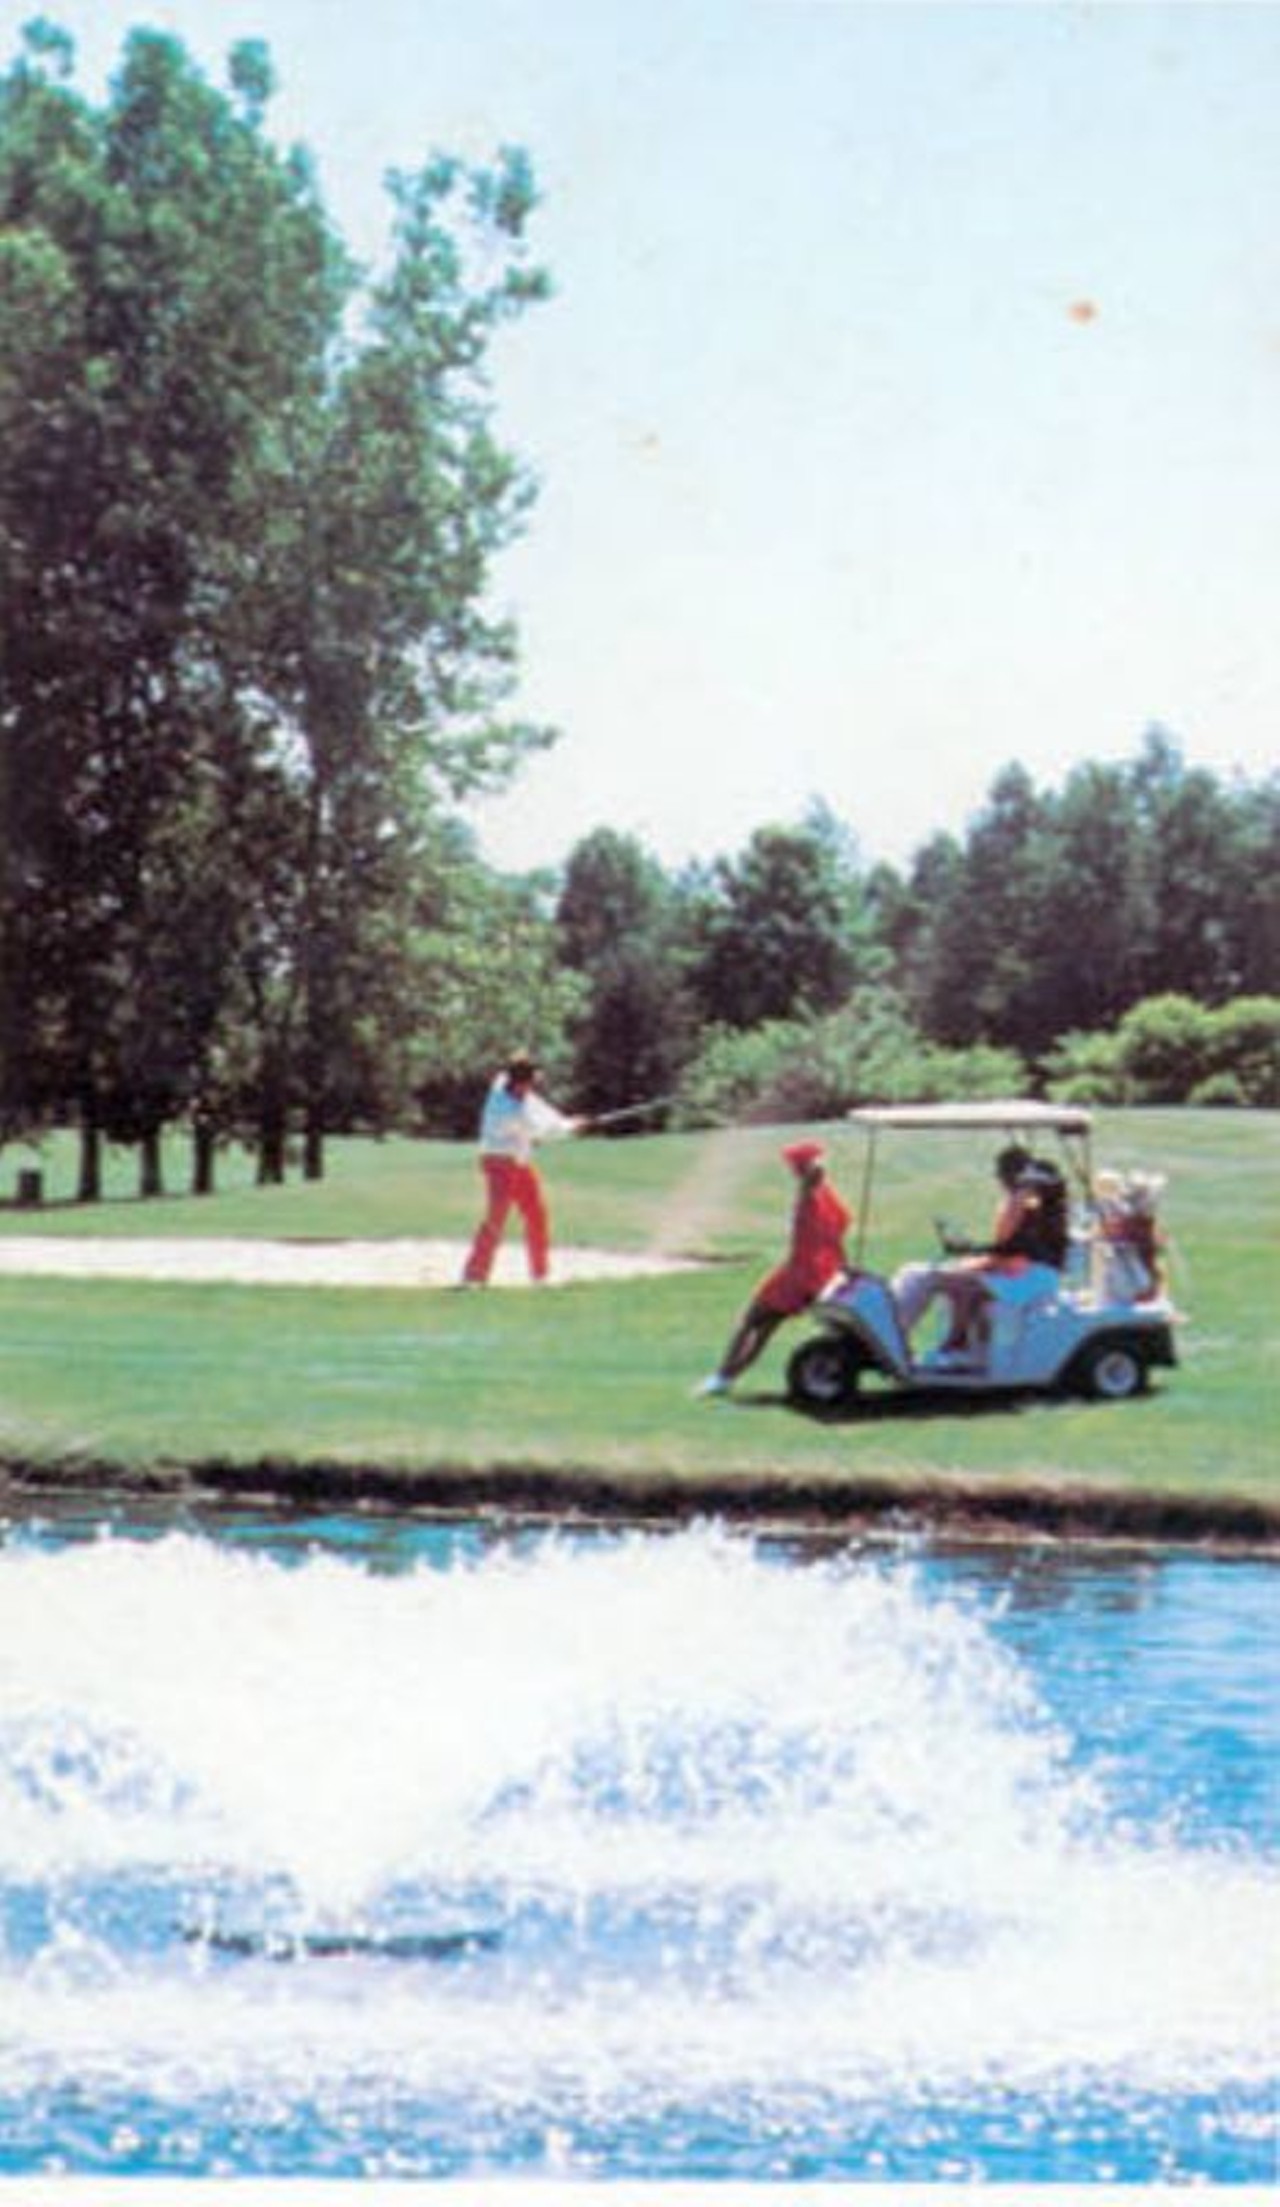 Postcard of the Aquamarine Resort & Country Club Golf Course, 1970s to 1980s